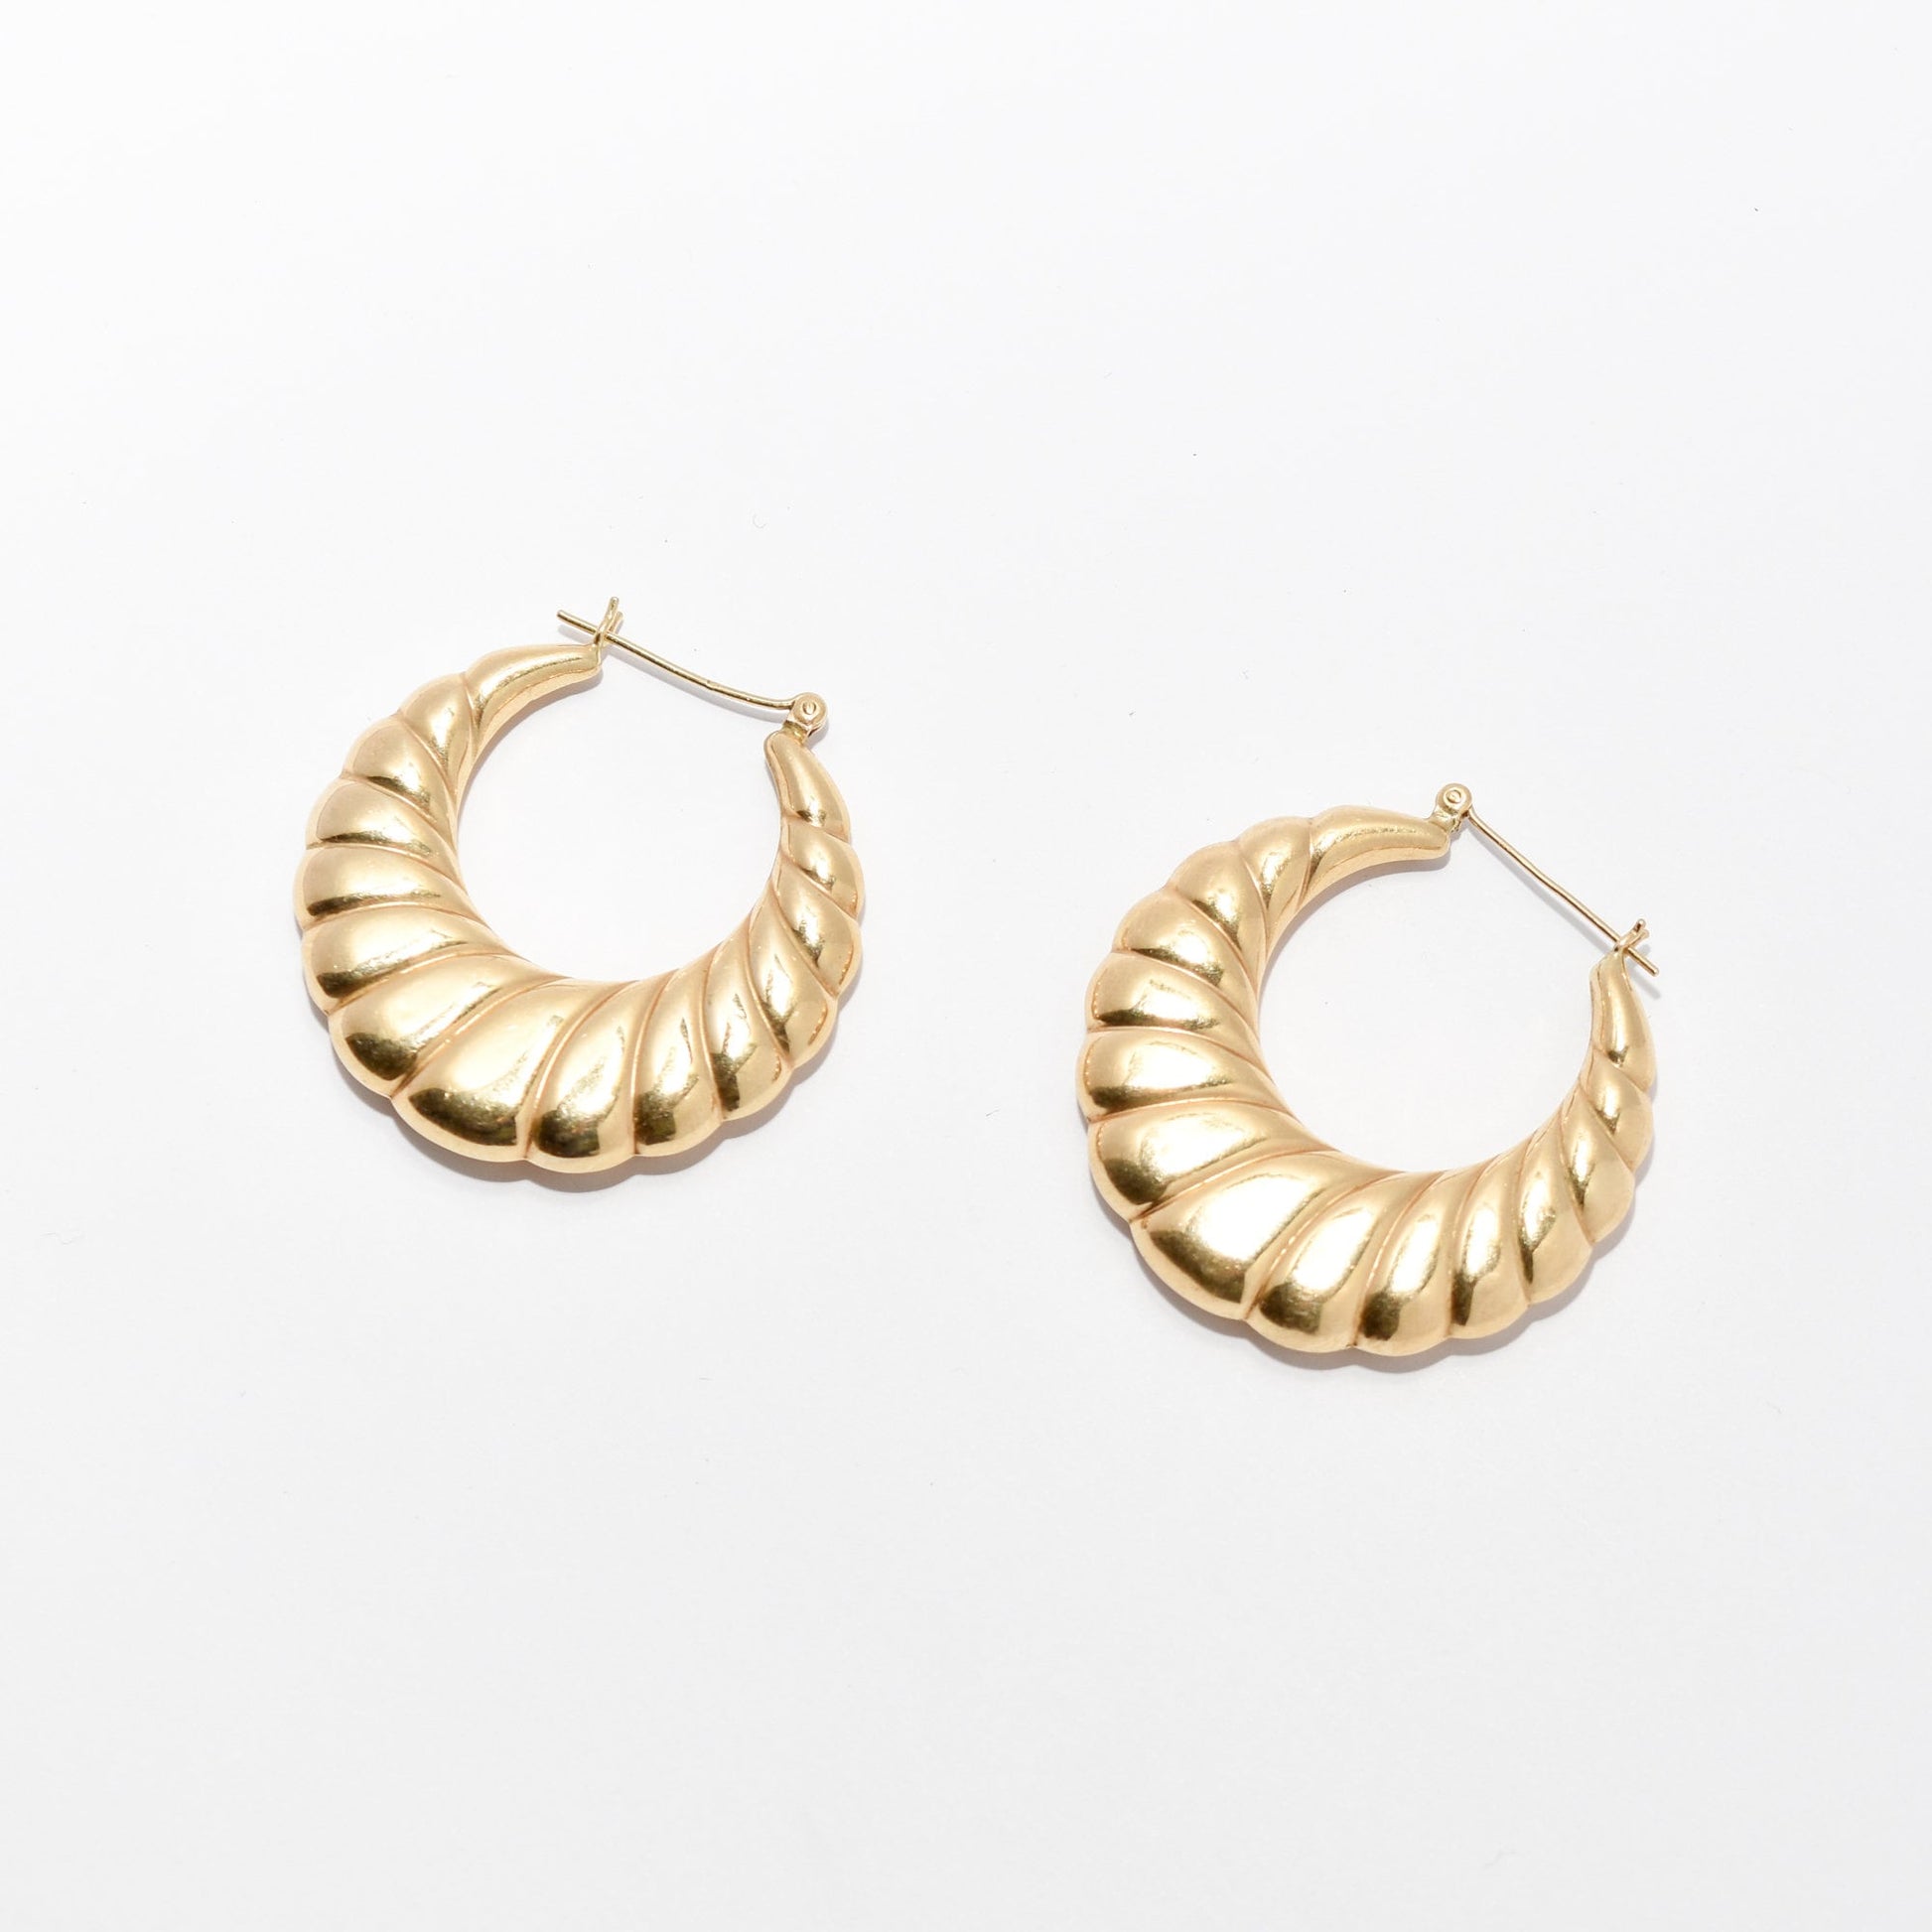 MCM 14K yellow gold puffed scallop hoop earrings medium size estate jewelry on white background